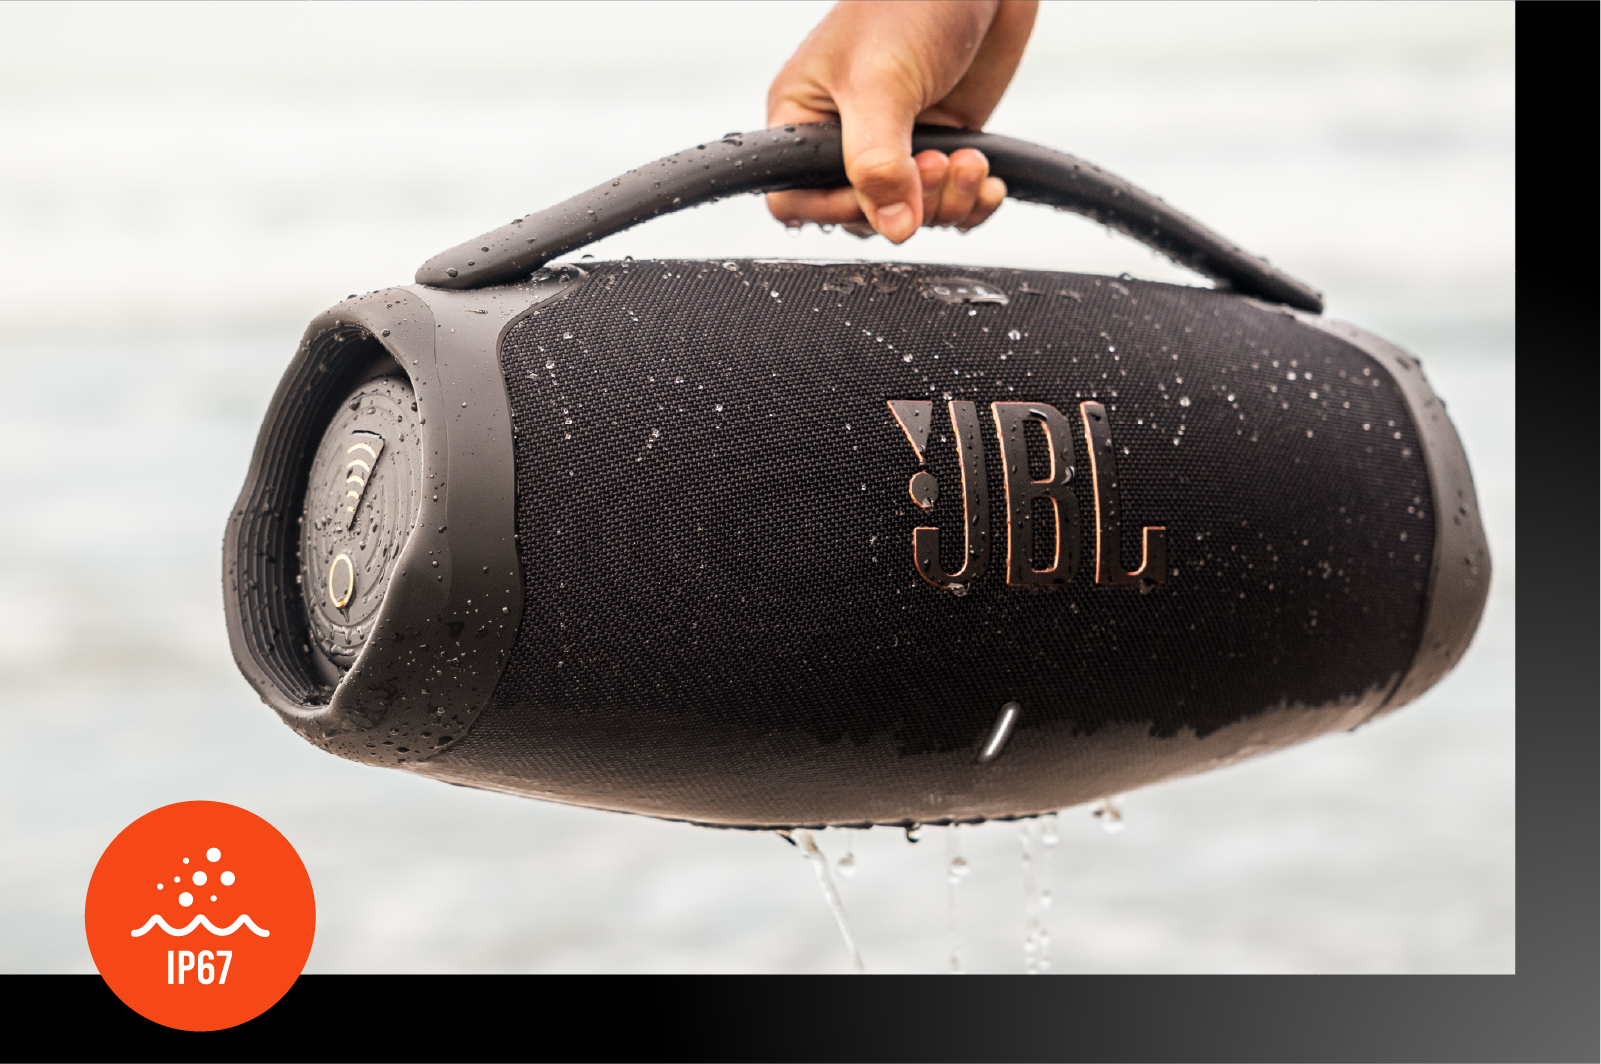 JBL Boombox 3 Wifi can handle almost any environment